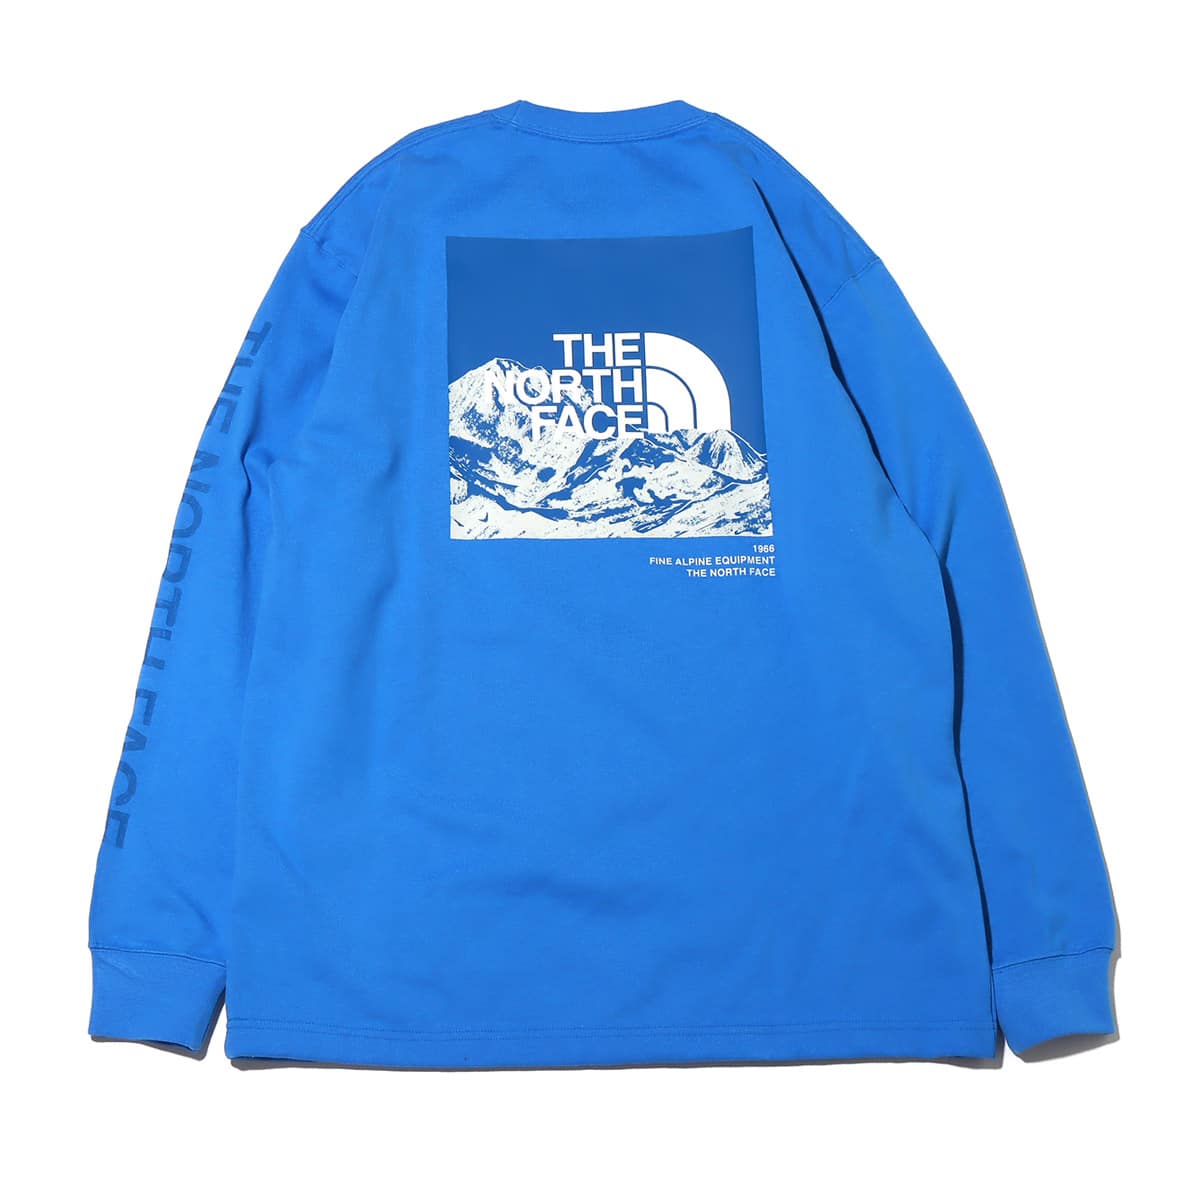 THE NORTH FACE L/S SLEEVE GRAPHIC TEE スーパーソニックブルー 23SS-I